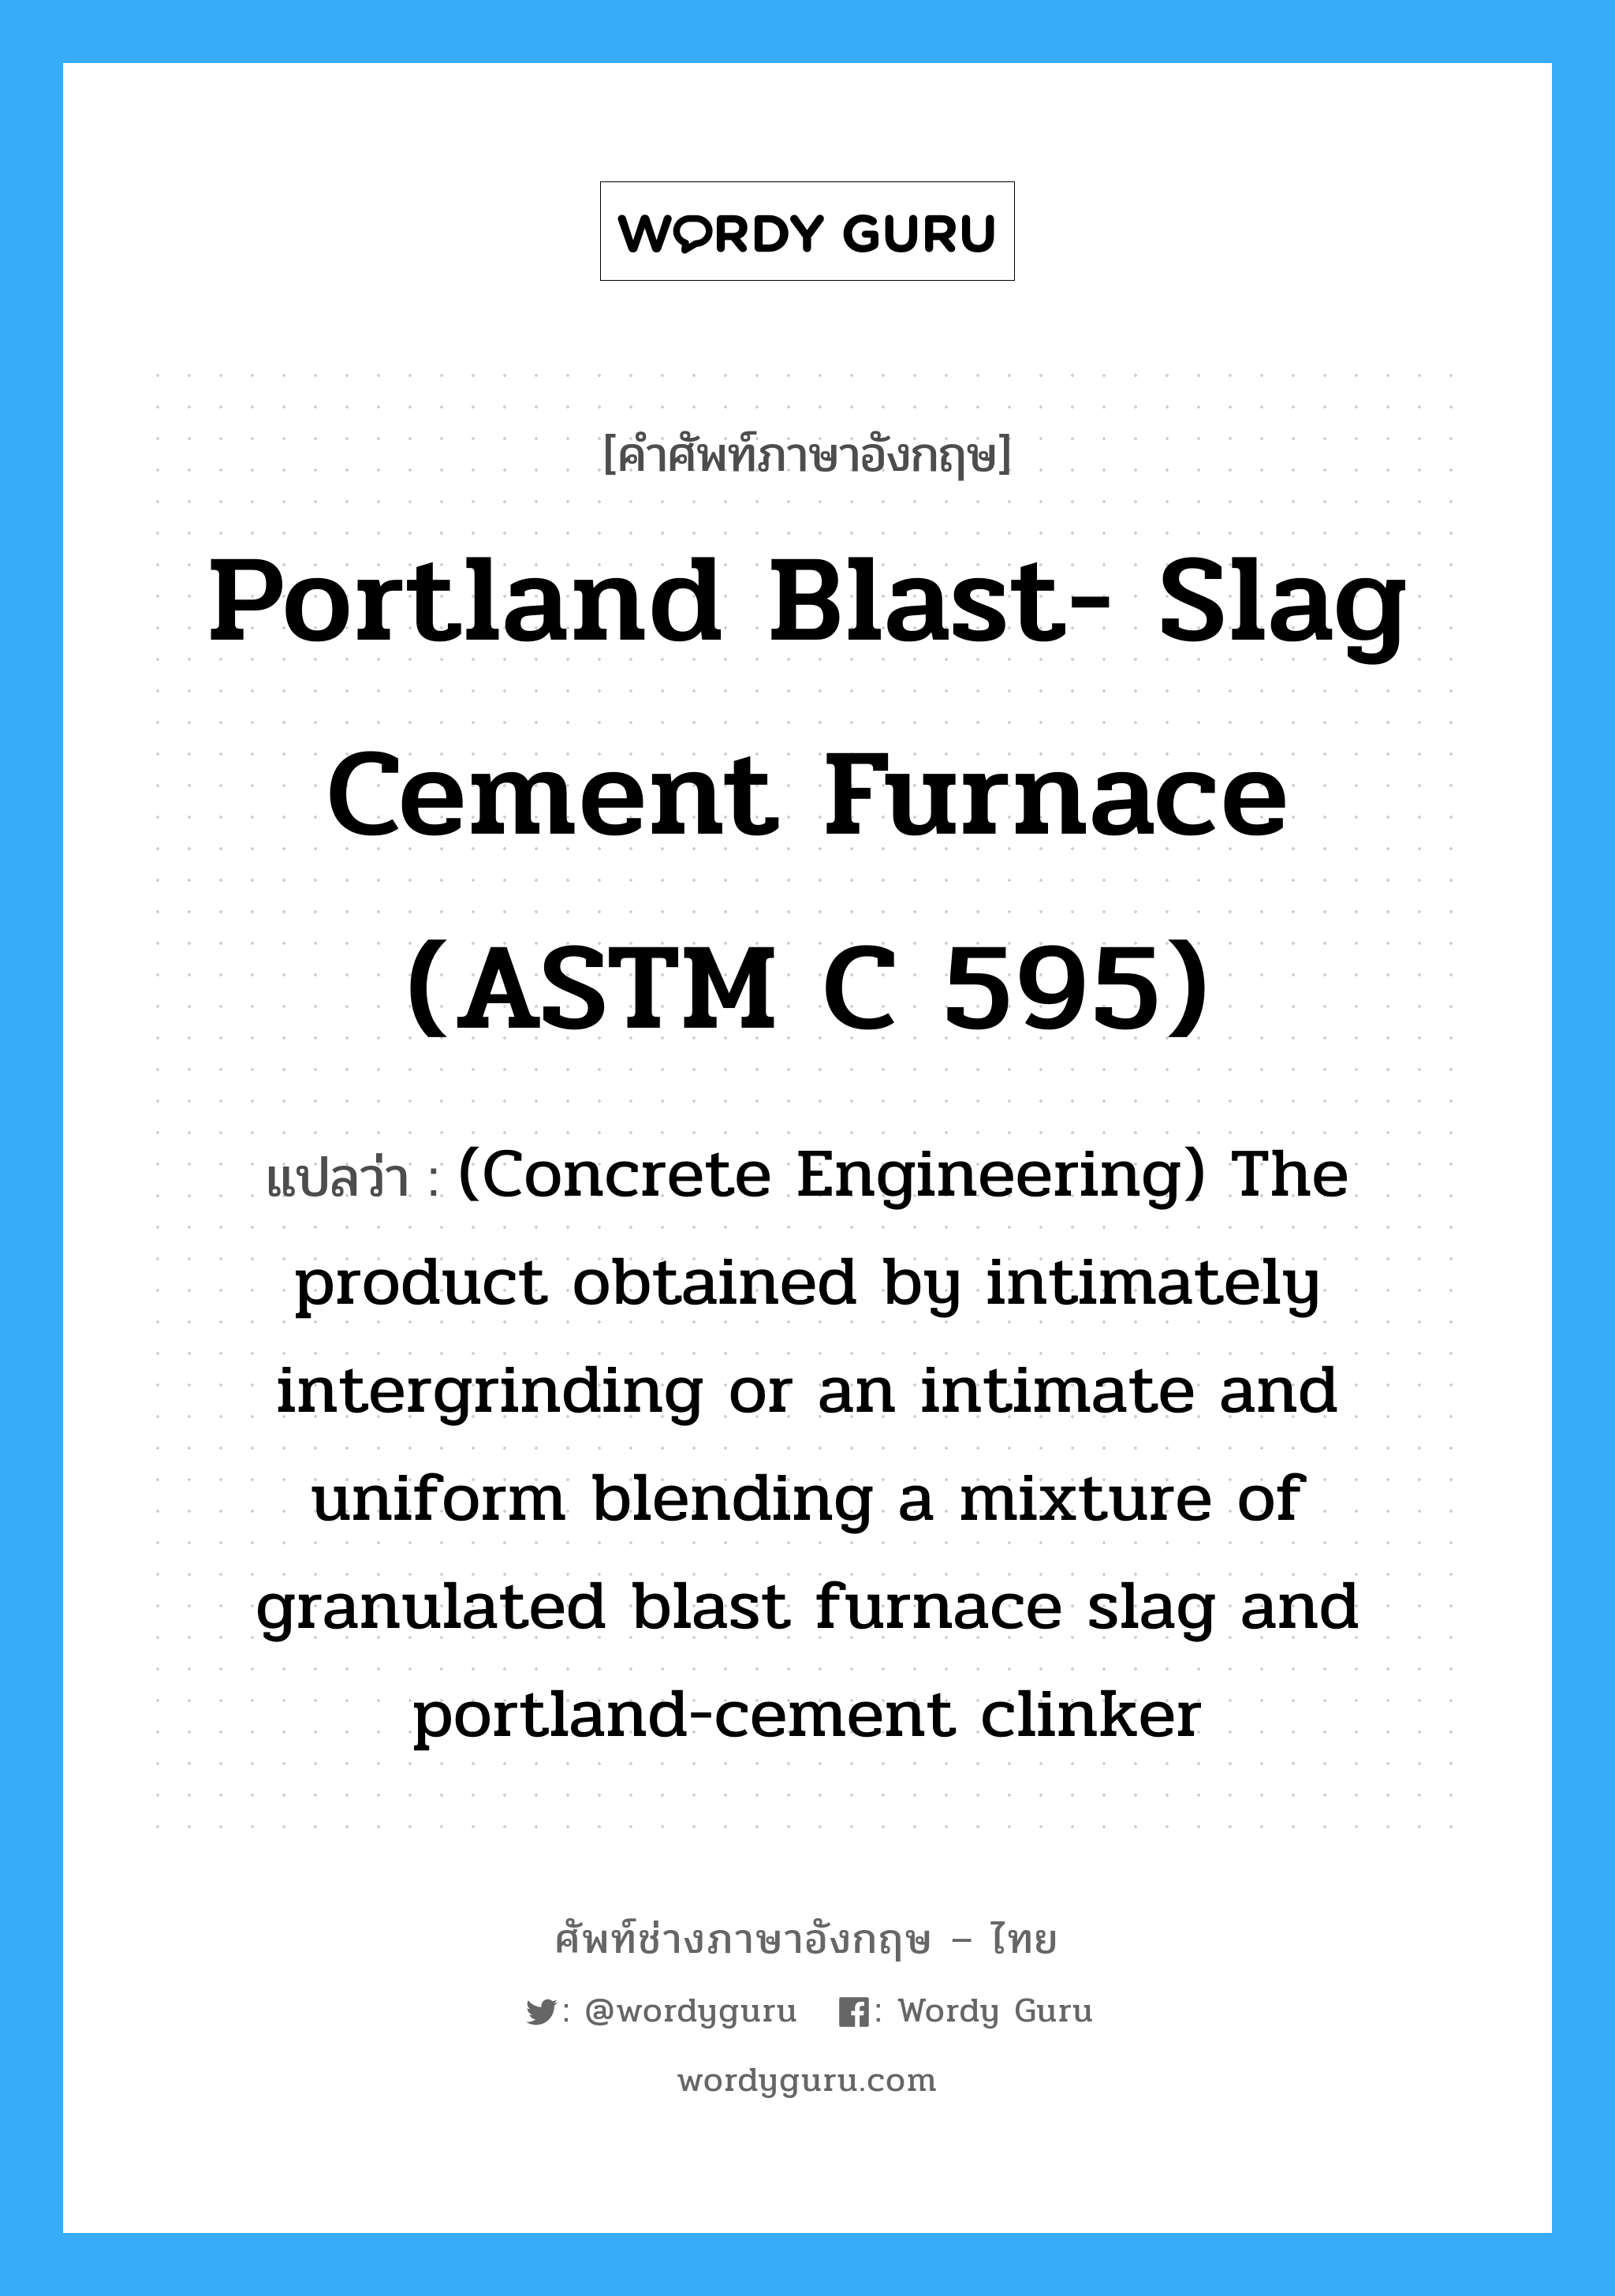 Portland Blast- slag Cement Furnace (ASTM C 595) แปลว่า?, คำศัพท์ช่างภาษาอังกฤษ - ไทย Portland Blast- slag Cement Furnace (ASTM C 595) คำศัพท์ภาษาอังกฤษ Portland Blast- slag Cement Furnace (ASTM C 595) แปลว่า (Concrete Engineering) The product obtained by intimately intergrinding or an intimate and uniform blending a mixture of granulated blast furnace slag and portland-cement clinker